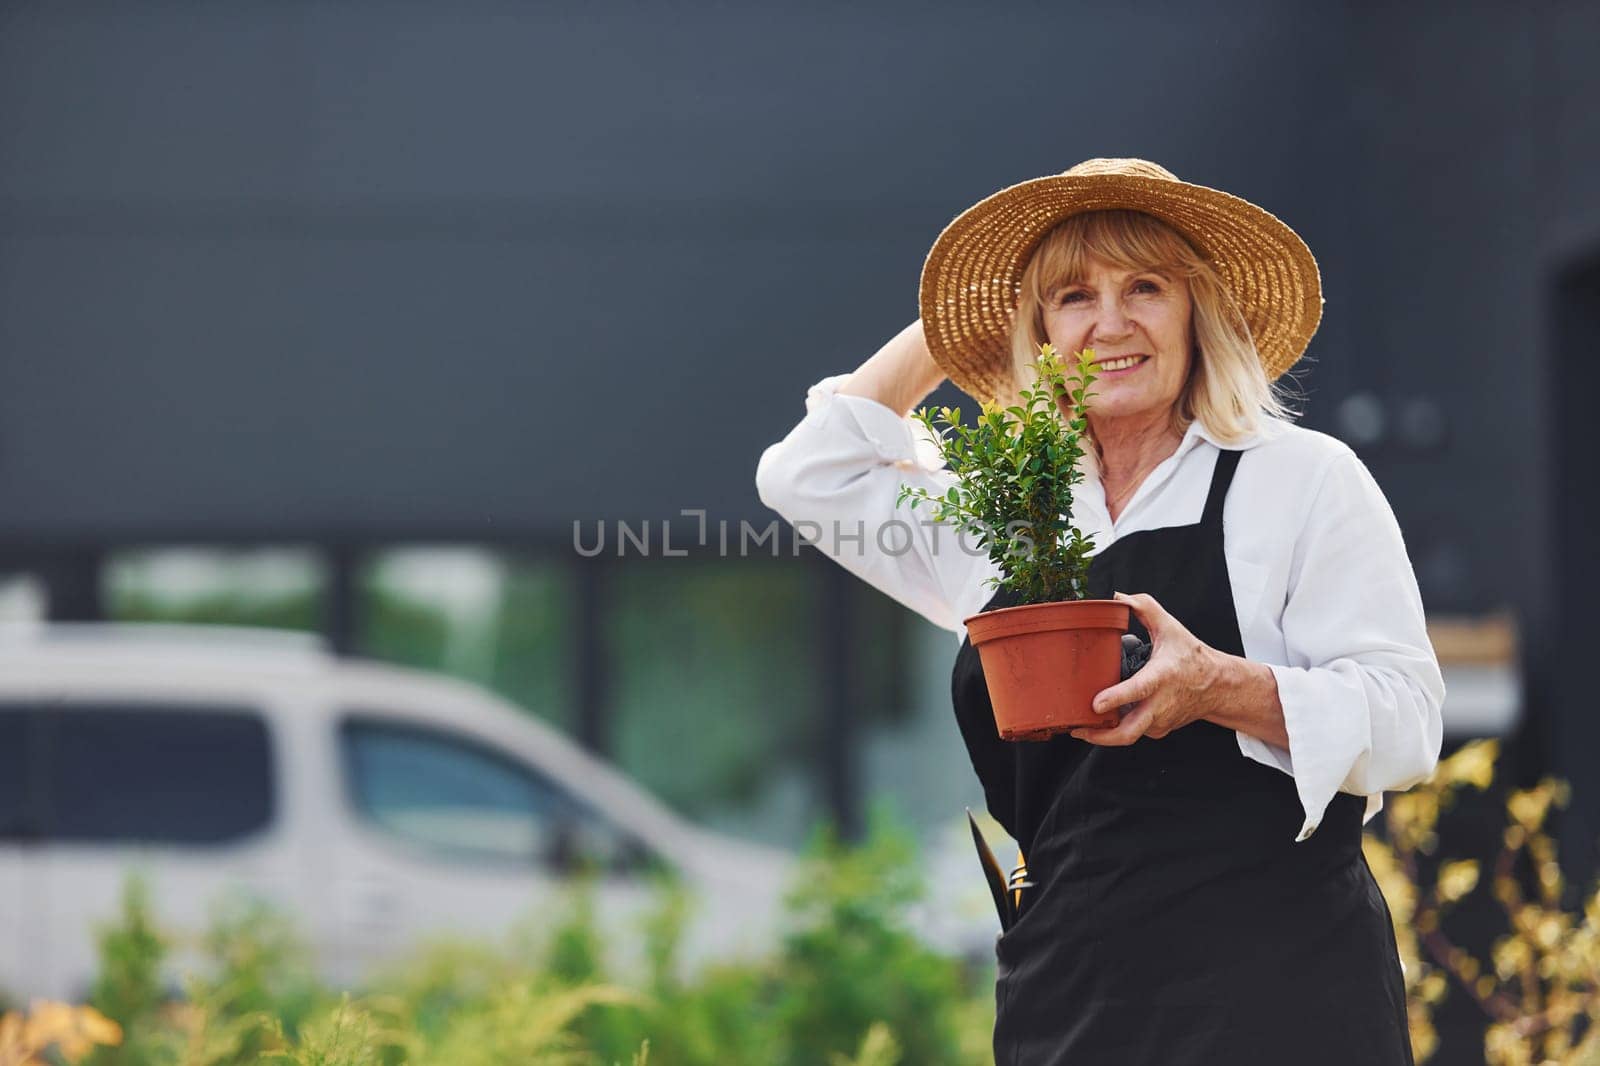 Holding pot in hands. Senior woman is in the mini garden at daytime. Building exterior behind by Standret